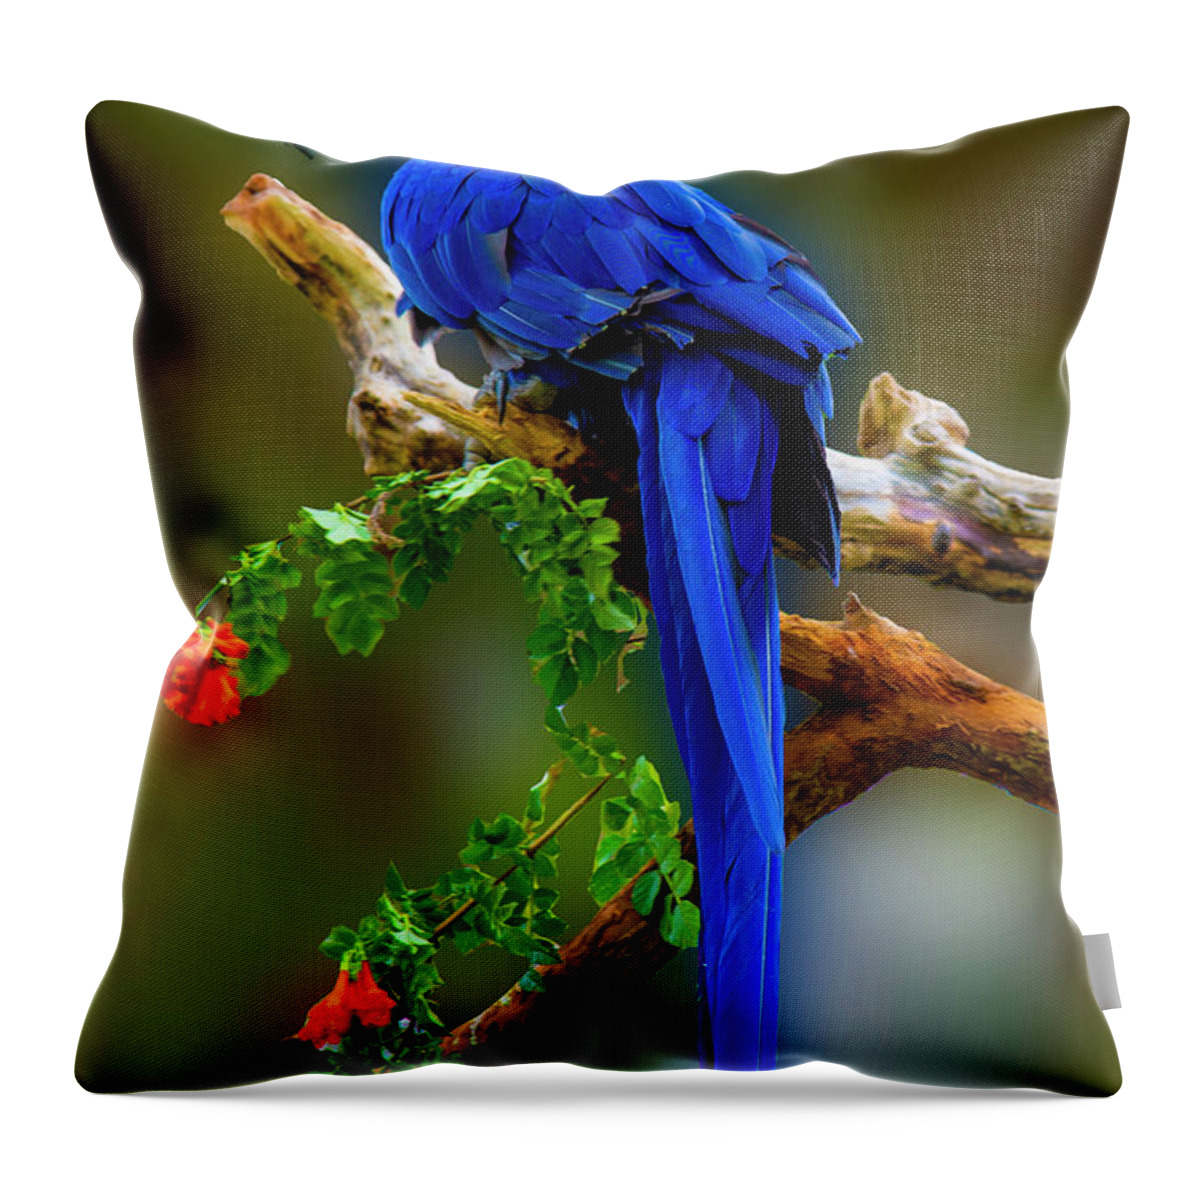 Photography Throw Pillow featuring the photograph Blue Macaw by Paul Wear